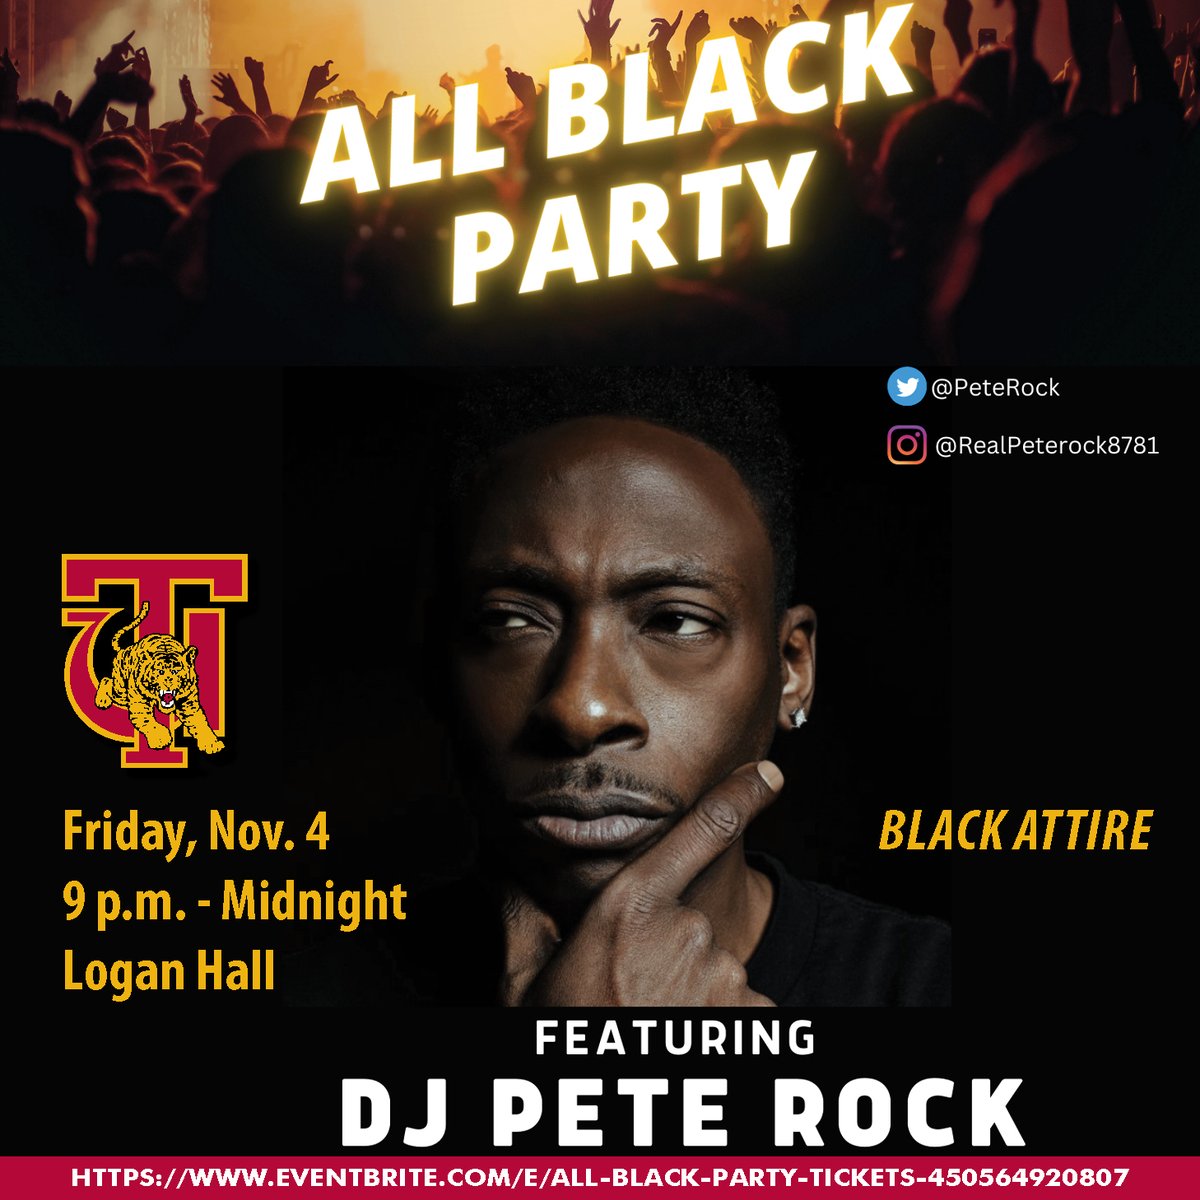 Calling all TU alumni! Get your tickets to the All Black Party featuring DJ Pete Rock. eventbrite.com/e/all-black-pa… #OneTuskegee #tuhc22